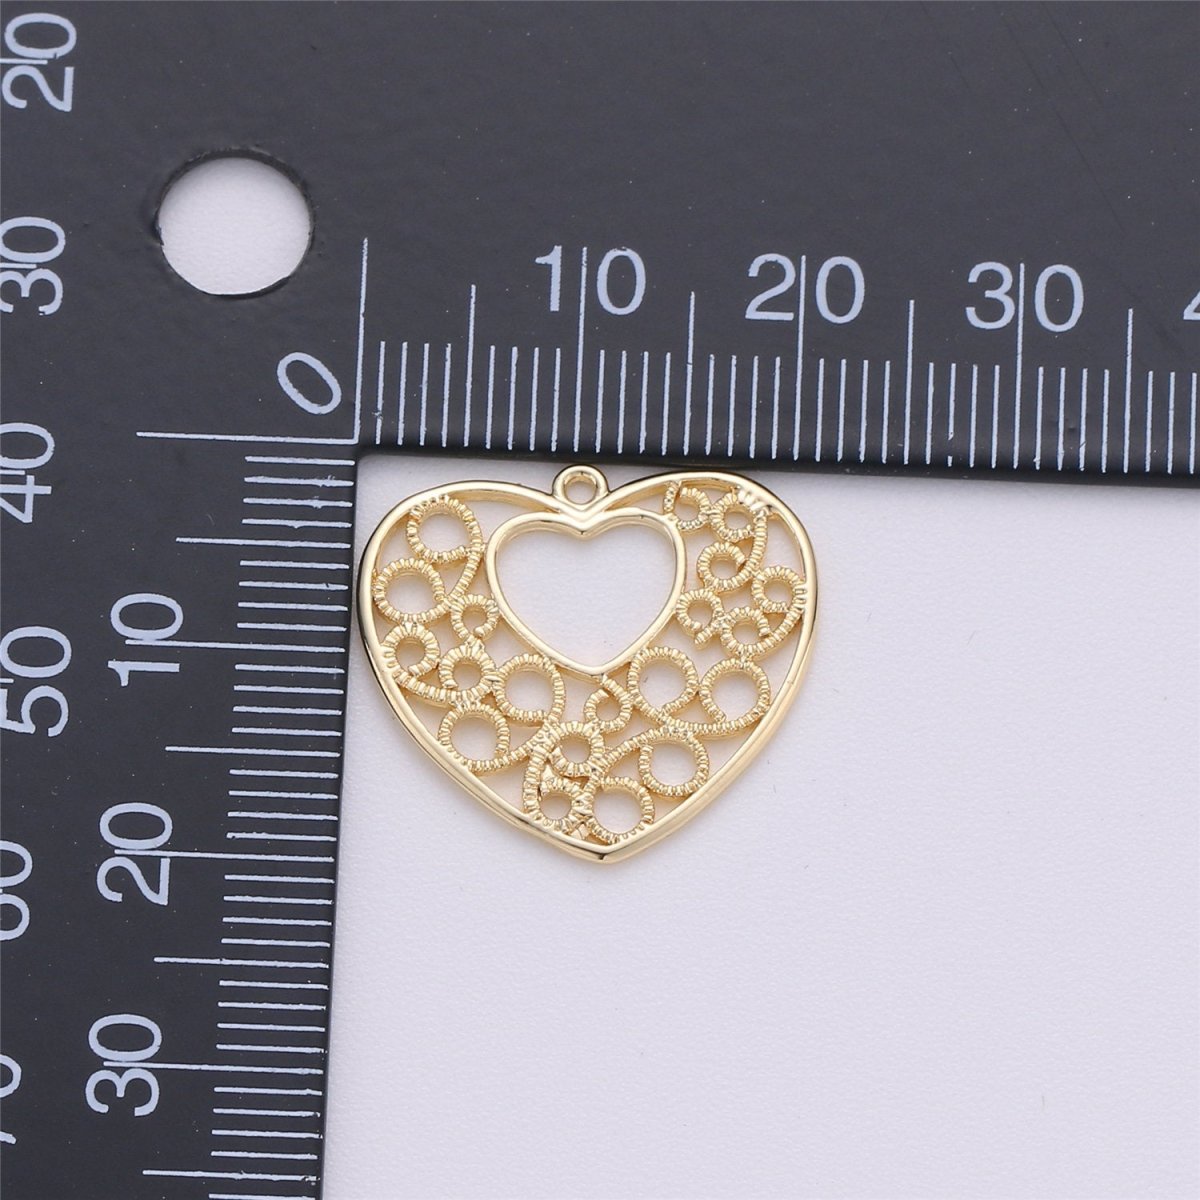 18K Gold Filled Chain Dainty Hearts Charm for Necklace Earring Charm for Jewelry Making Stylish Love Charm Filigree,C-456 - DLUXCA